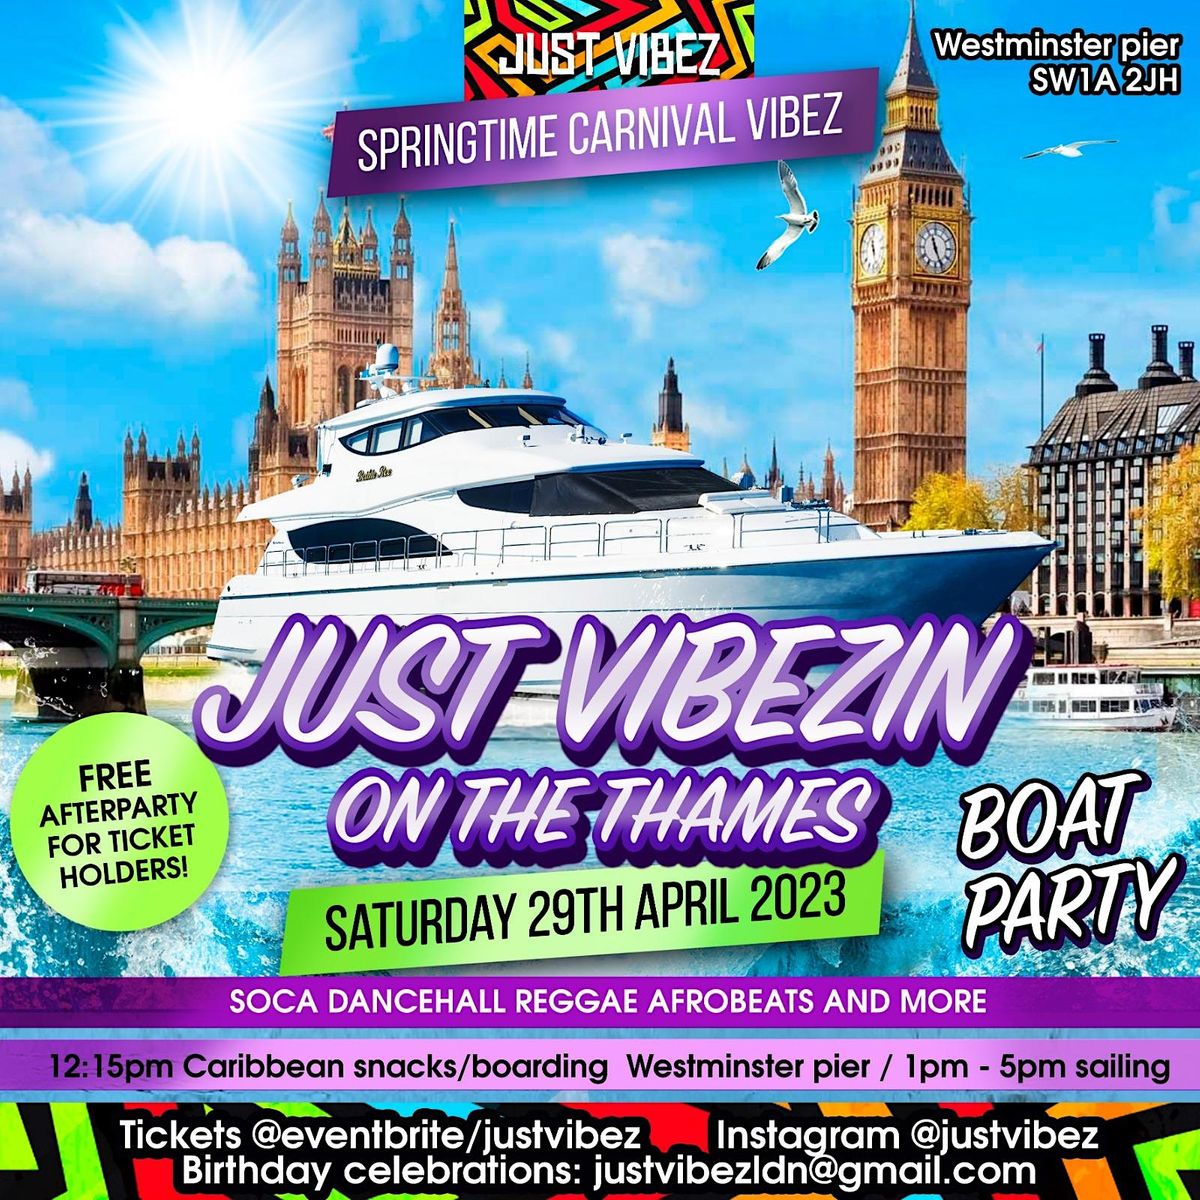 Just Vibezin on the Thames! The JUST VIBEZ Spring time boat party!